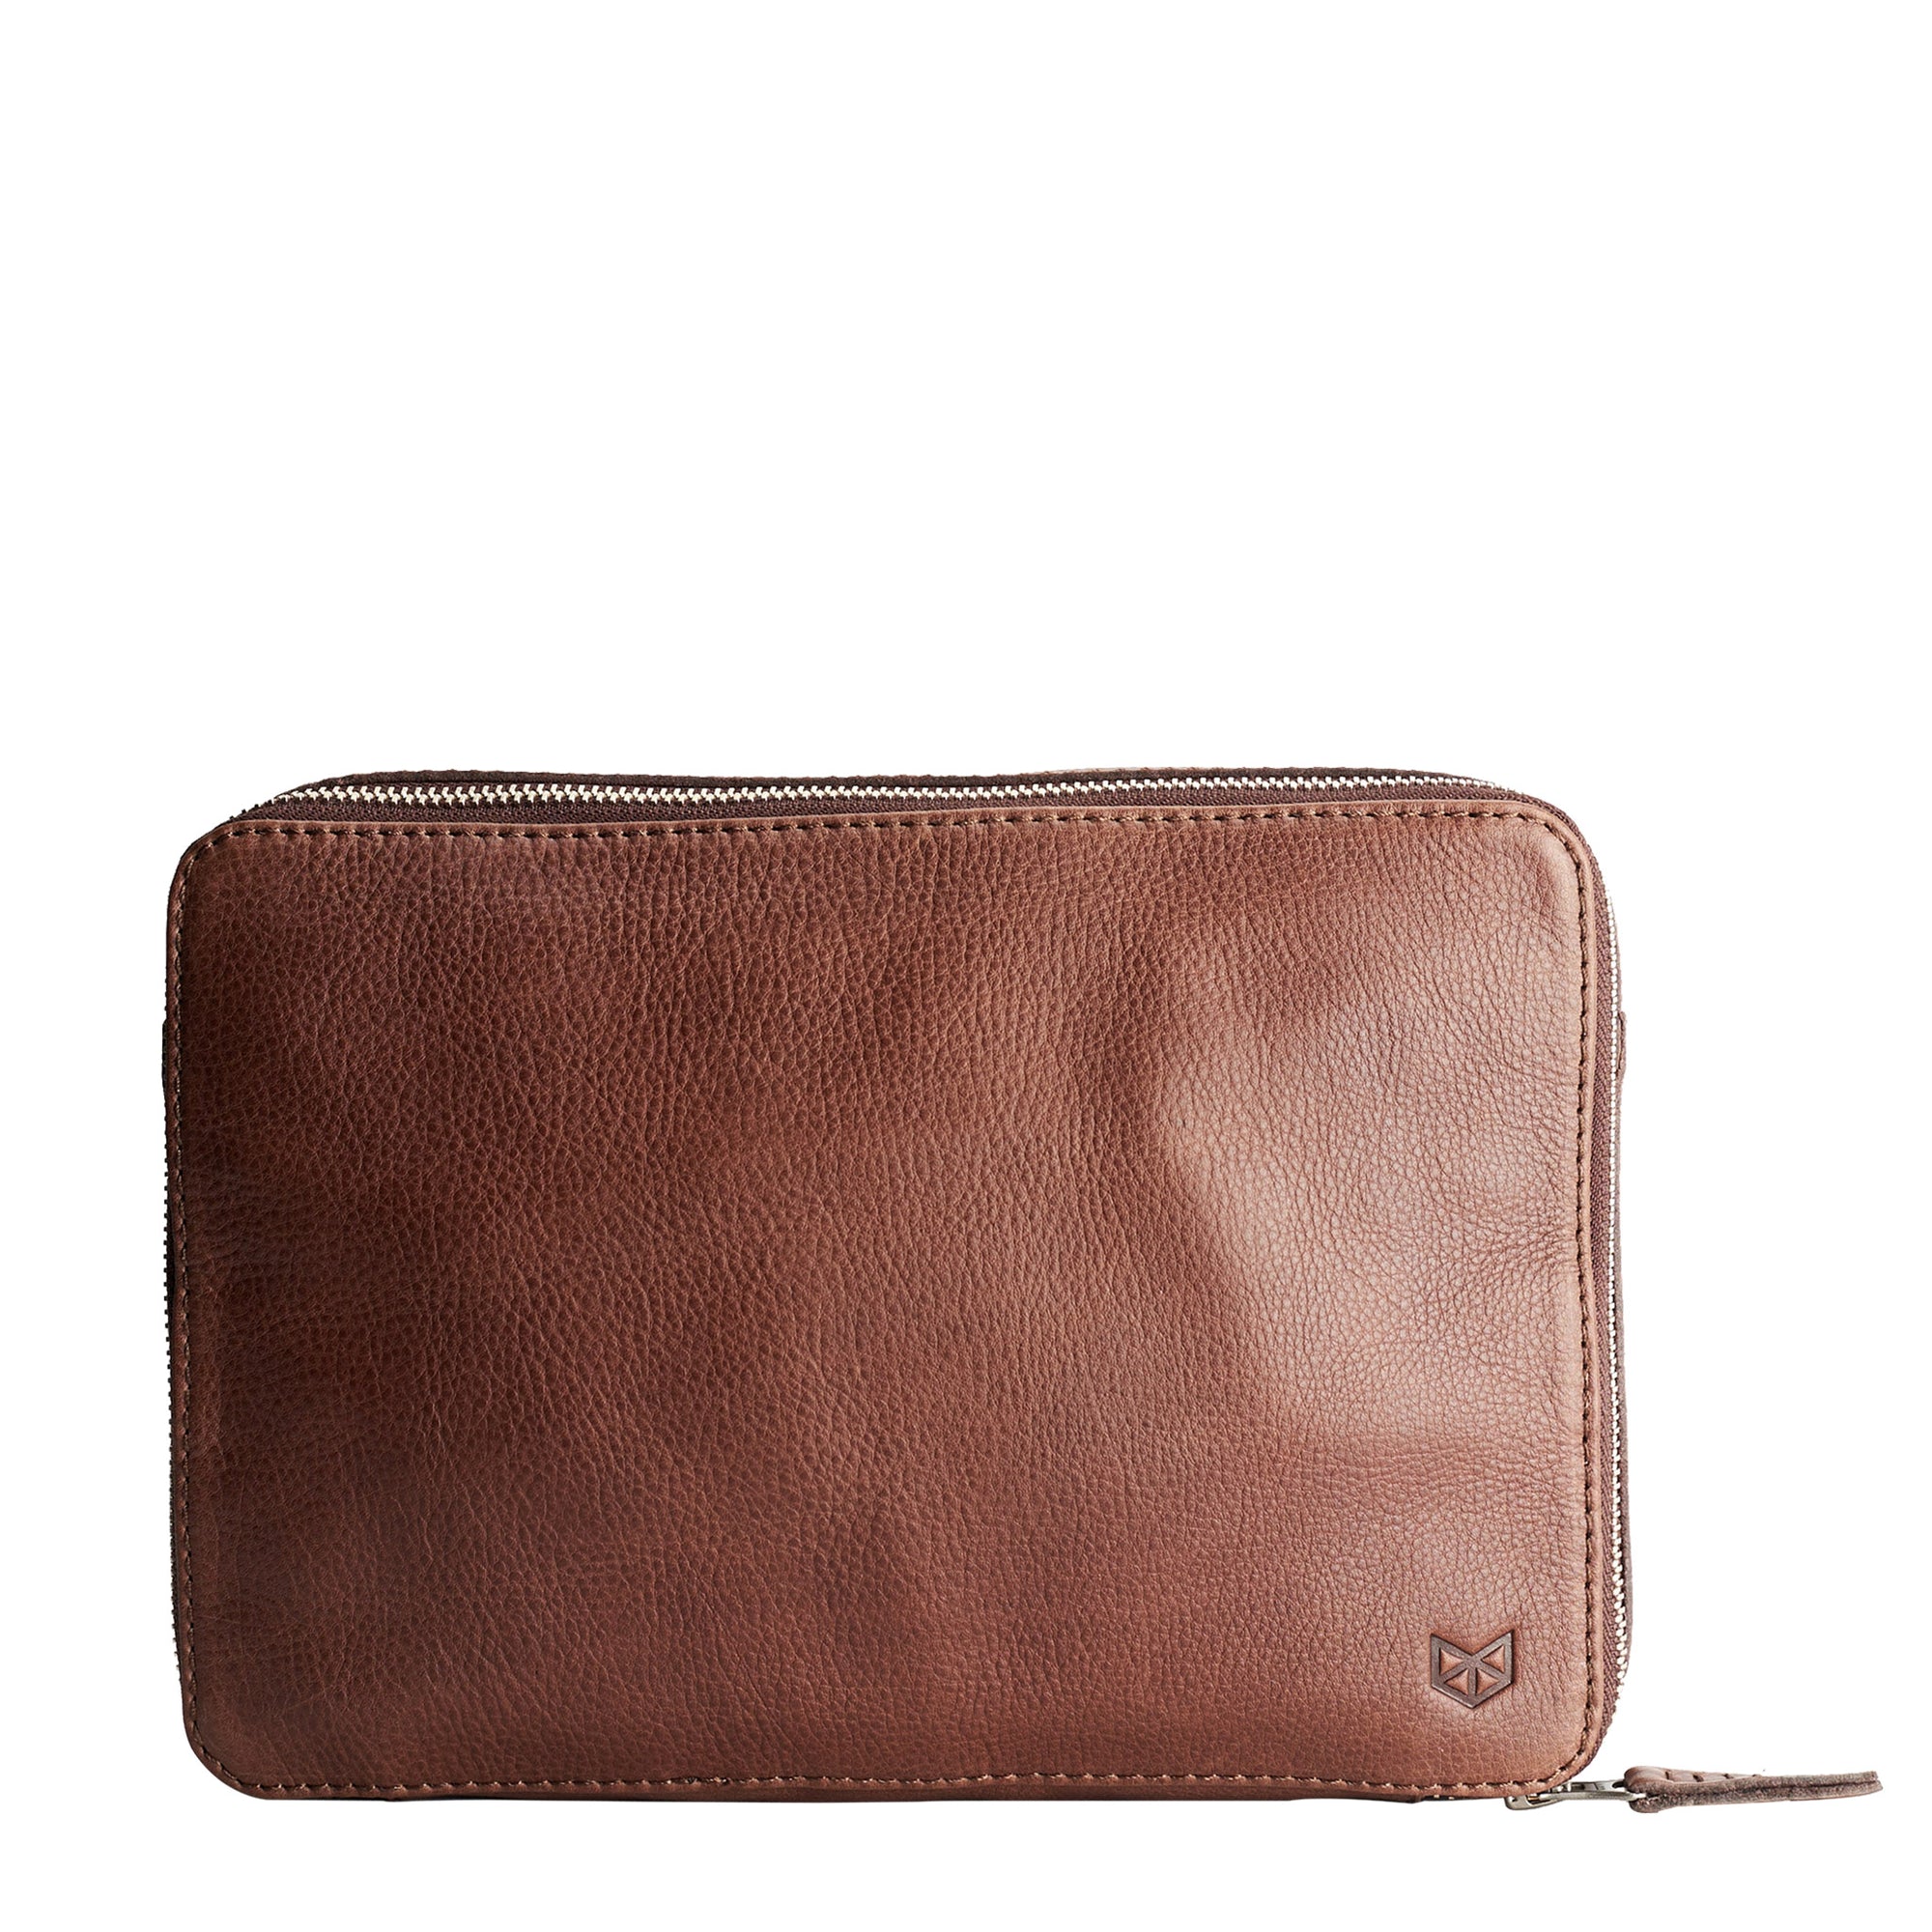 Brown leather gadget bag, tech dopp kit, electronic organizer. Fits iPad Pro with Apple pencil.